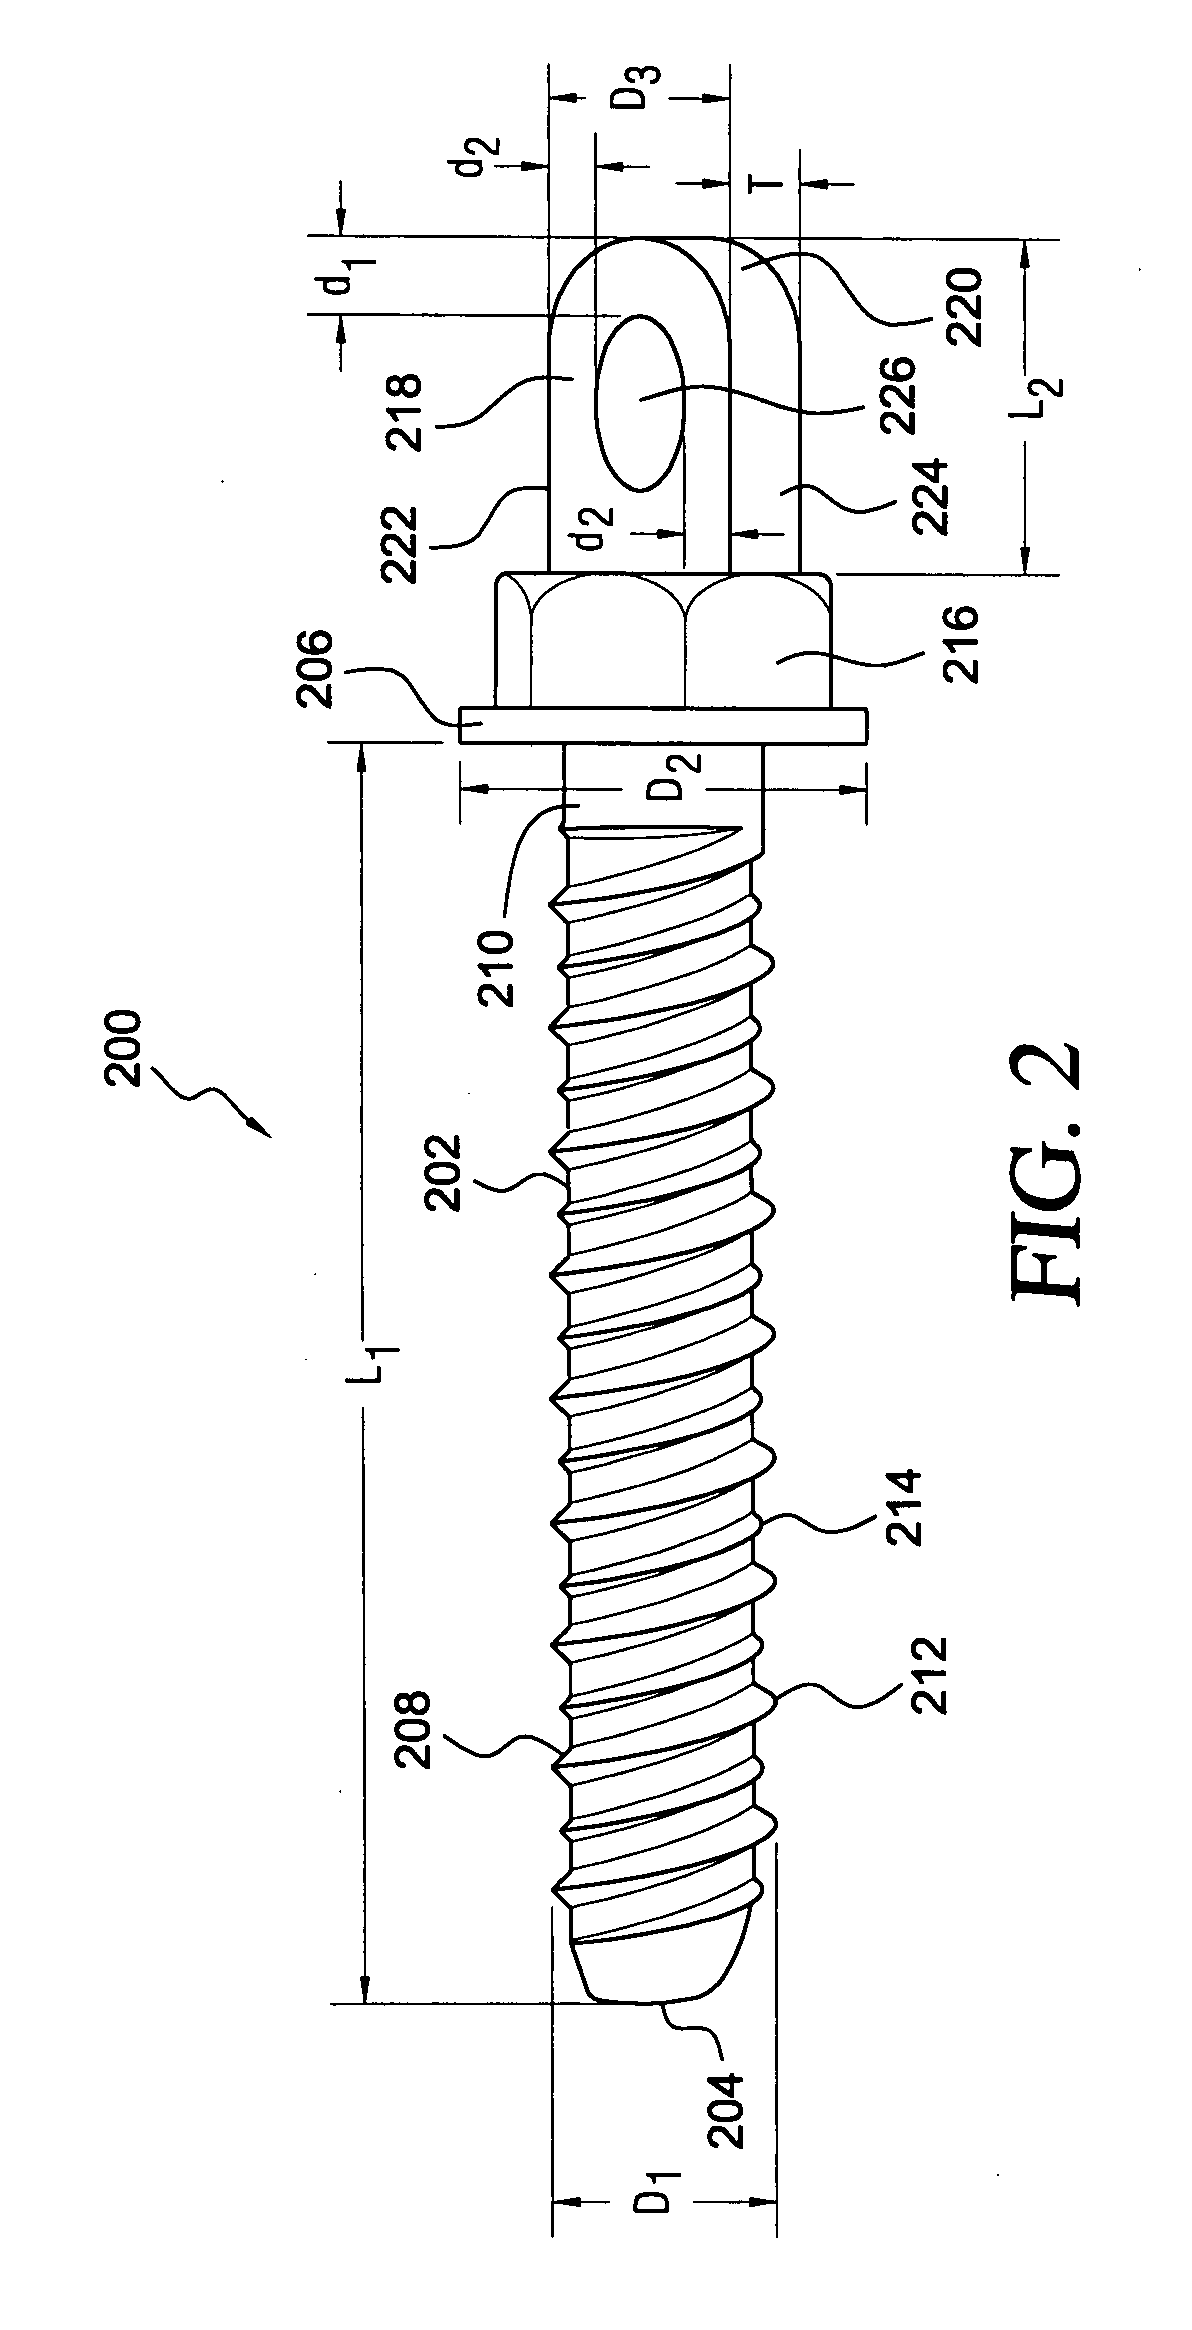 Threaded anchor having a head portion comprising a hexagonally configured drive section, and an integral projection having a transverse bore formed therein